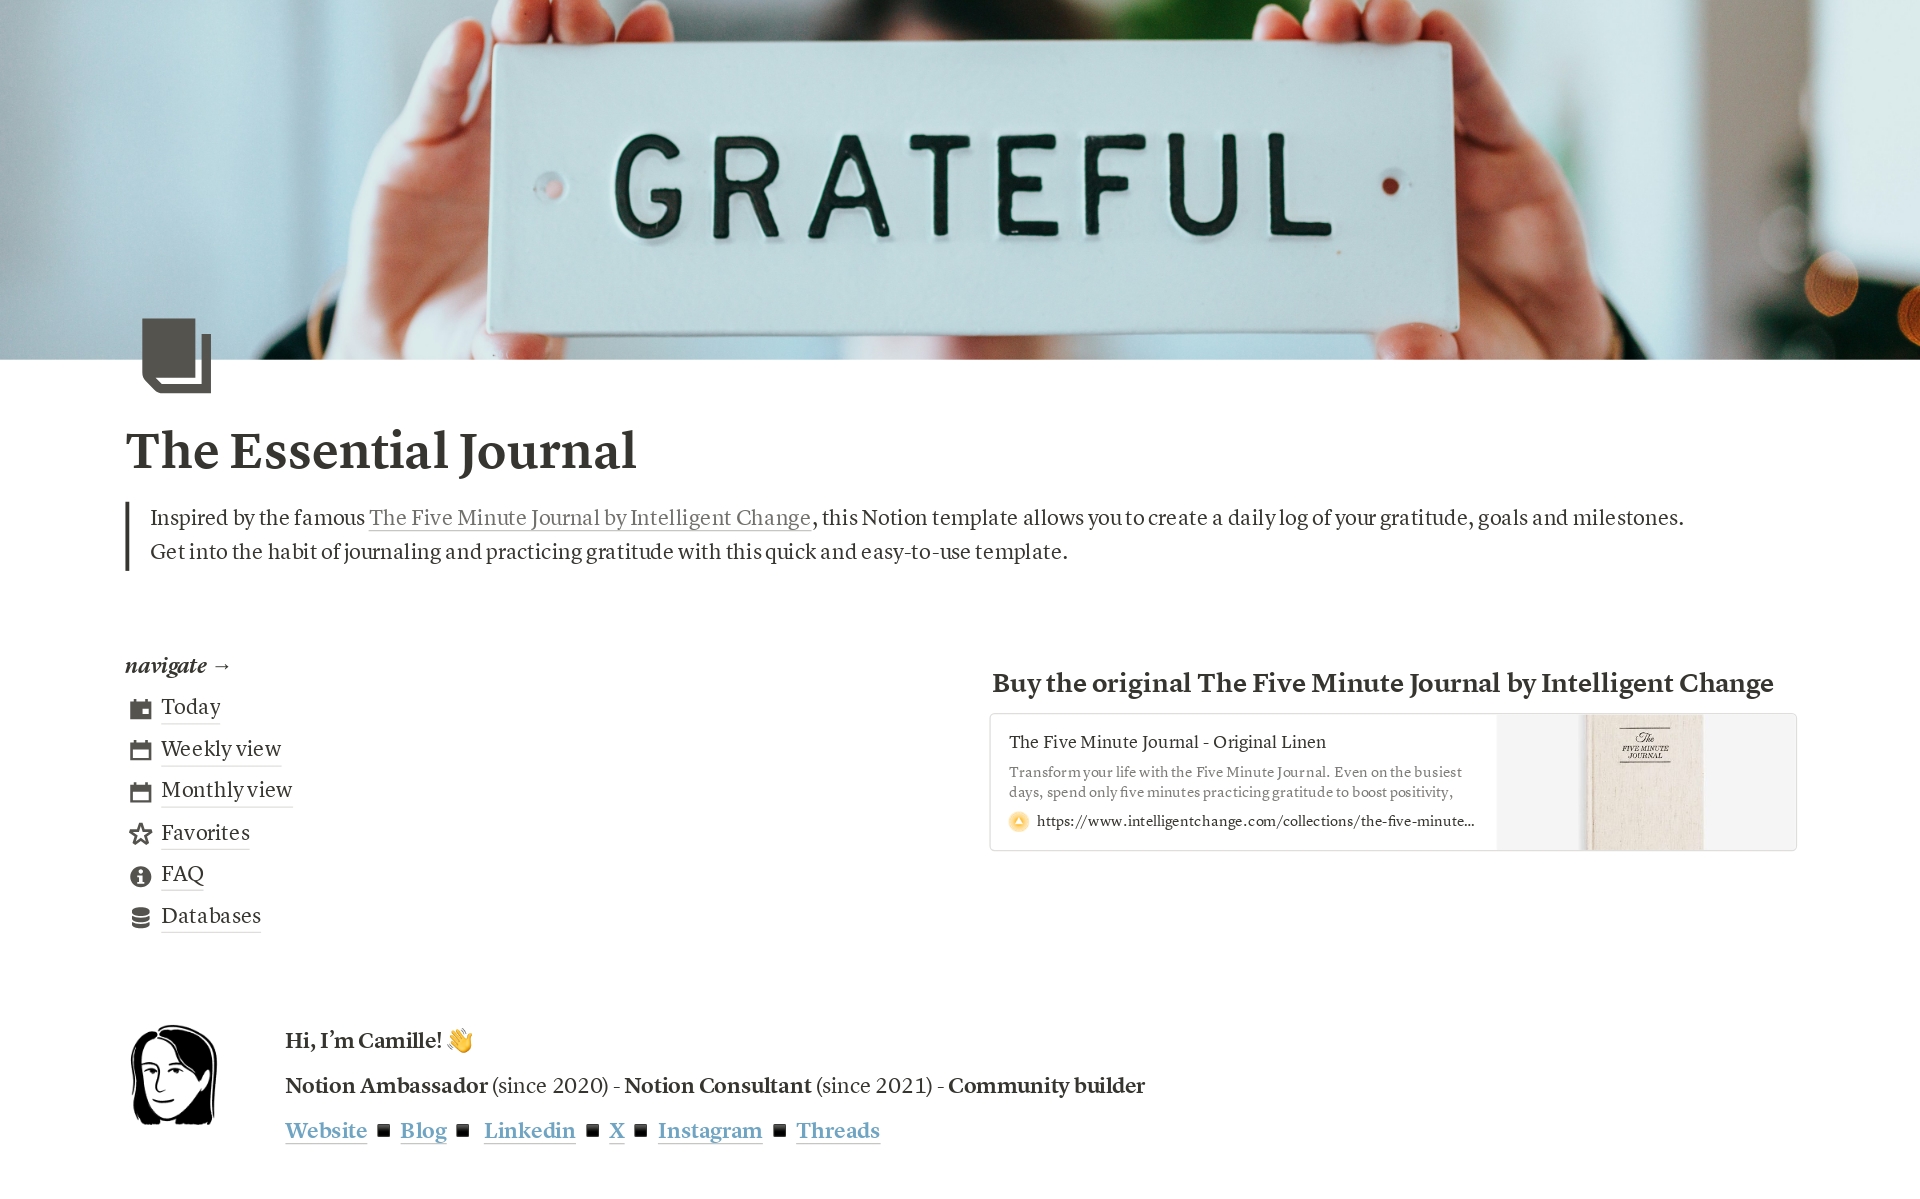 Inspired by the famous The Five Minute Journal by Intelligent Change, this Notion template allows you to create a daily log of your gratitude, goals and highlights. Get into the habit of journaling and practicing gratitude with this quick and easy-to-use template.